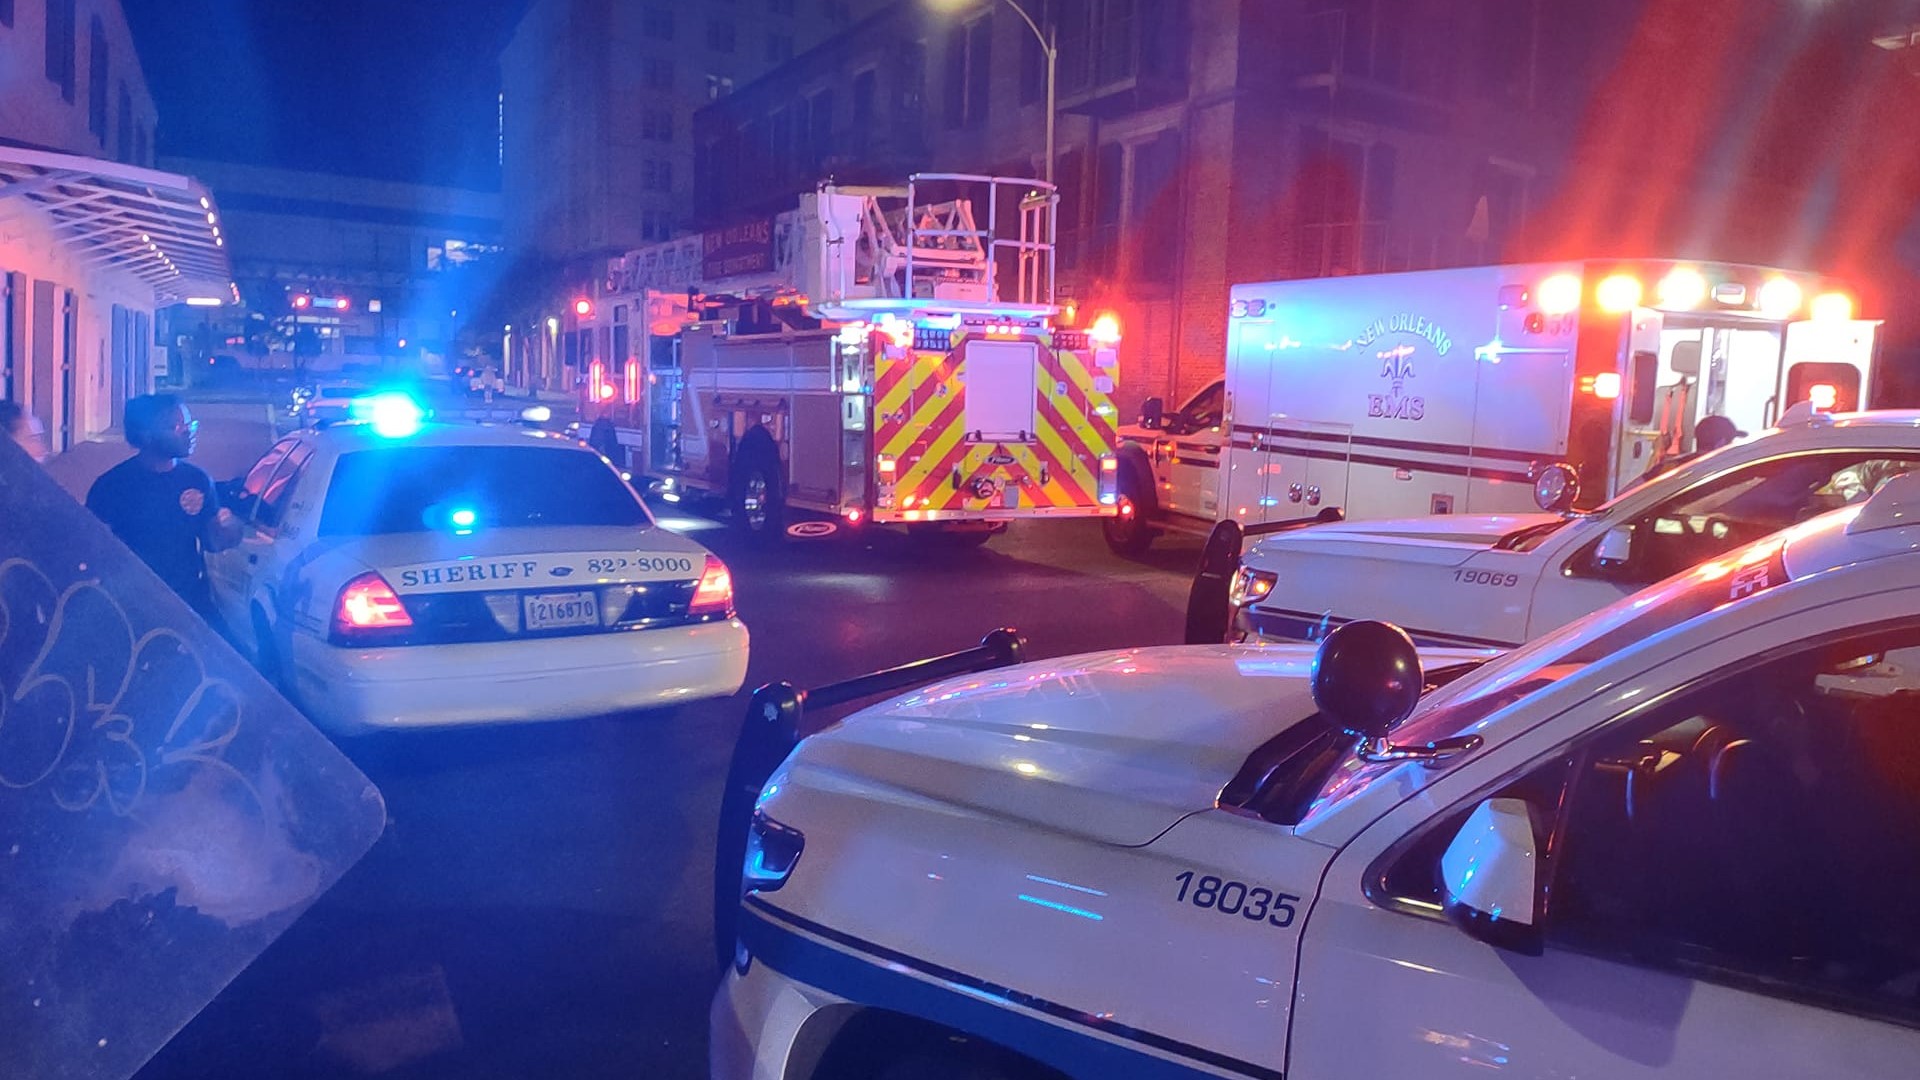 1 dead, 11 injured in mass shooting in the Warehouse District New Orleans.